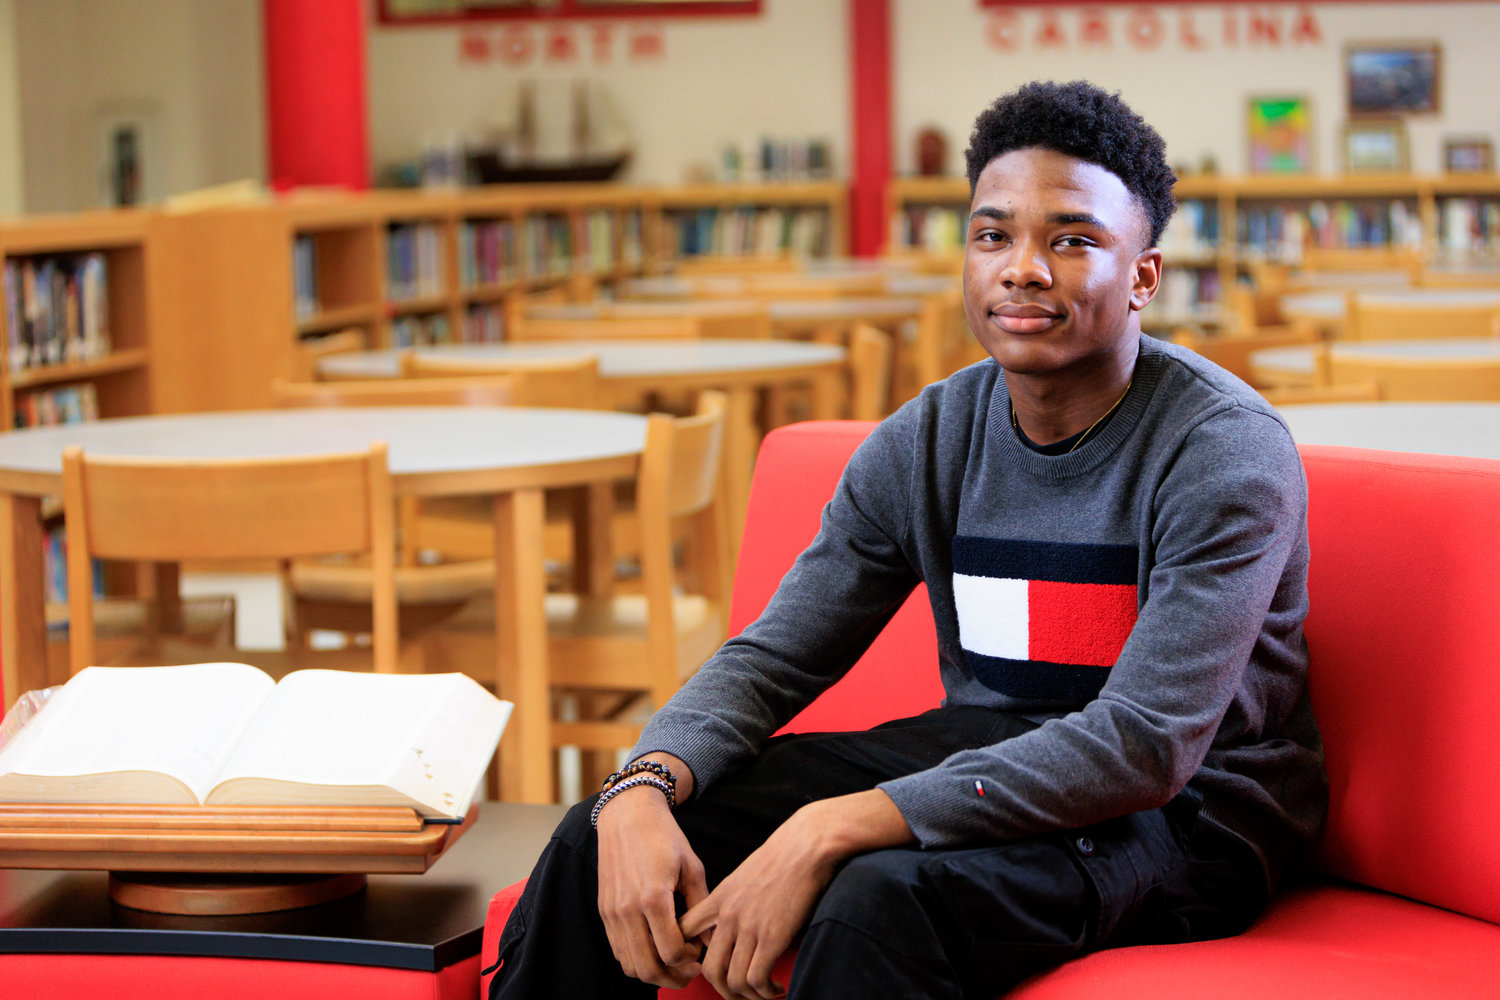 Adejuwon Balogun maintained a 4.0 GPA throughout his time at Seventy-First High School. He was also involved in multiple clubs and sports teams.